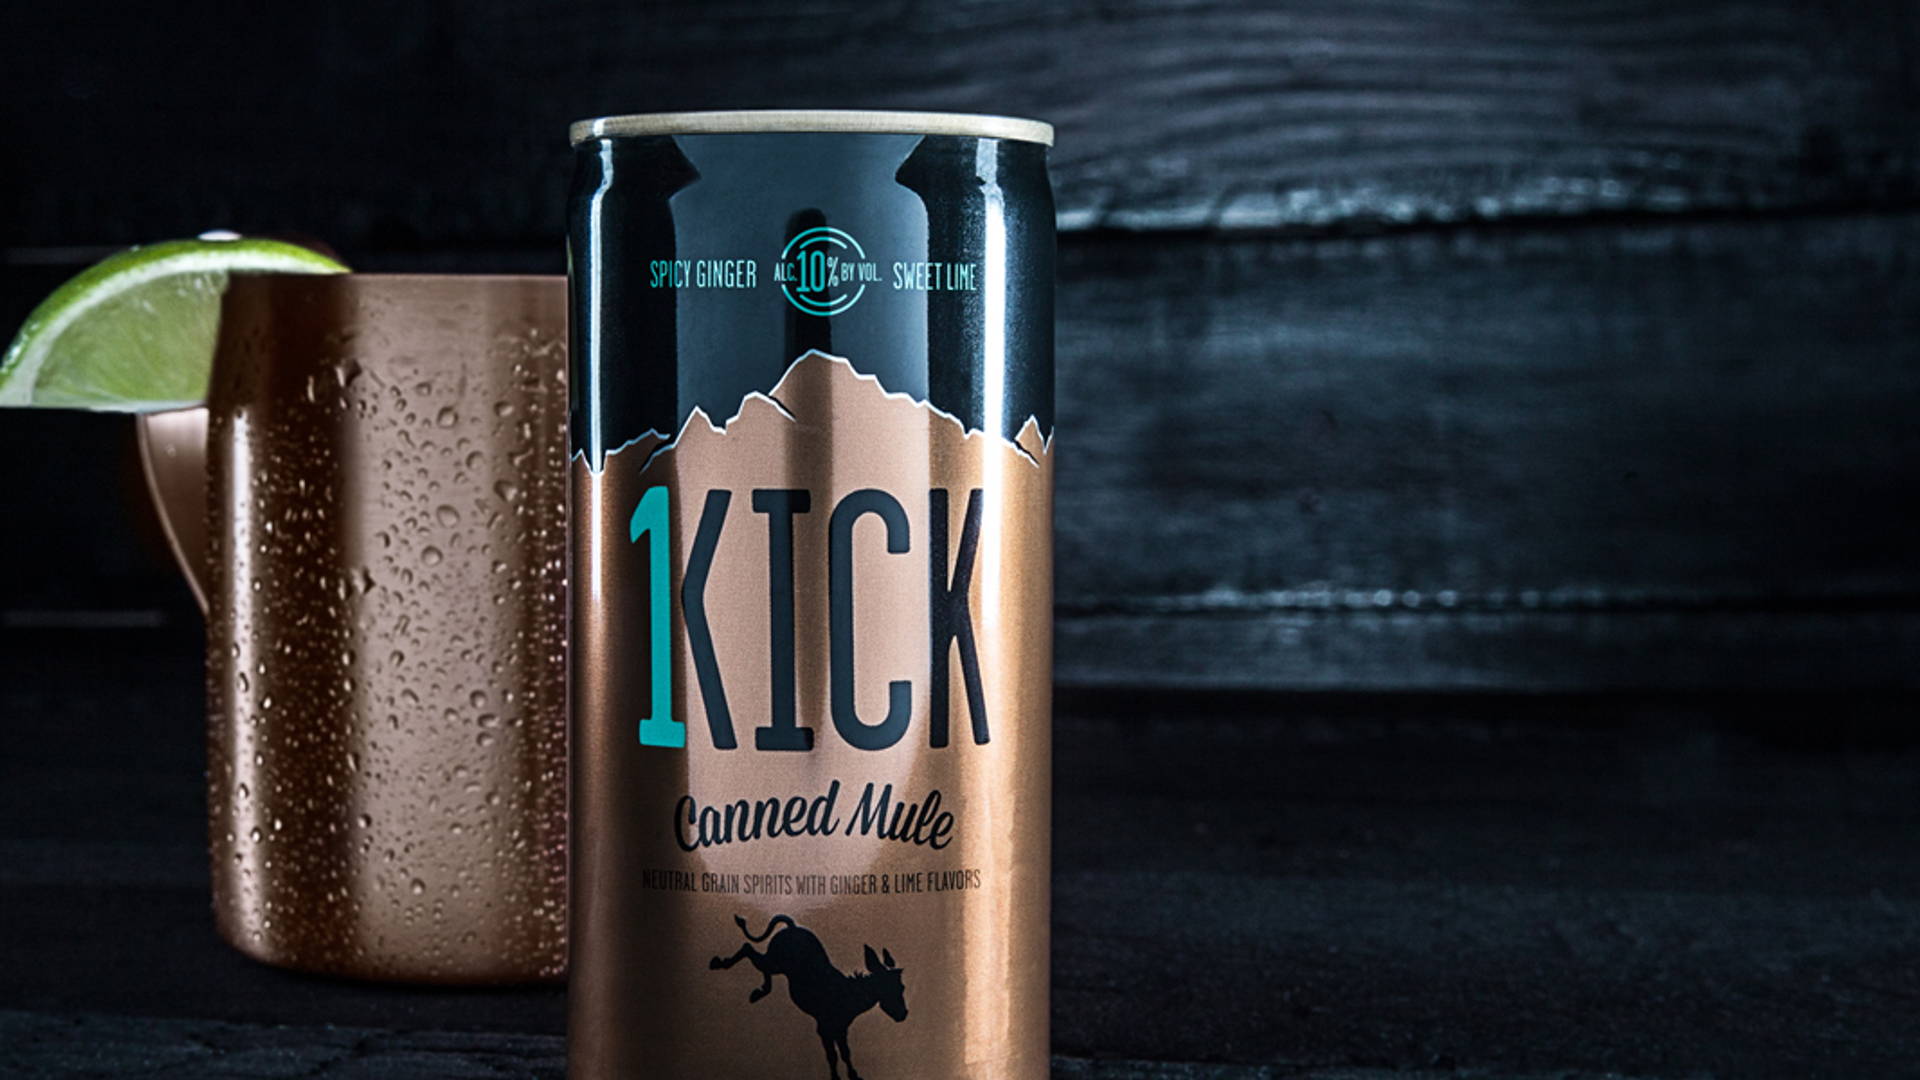 Featured image for 1Kick Canned Mule